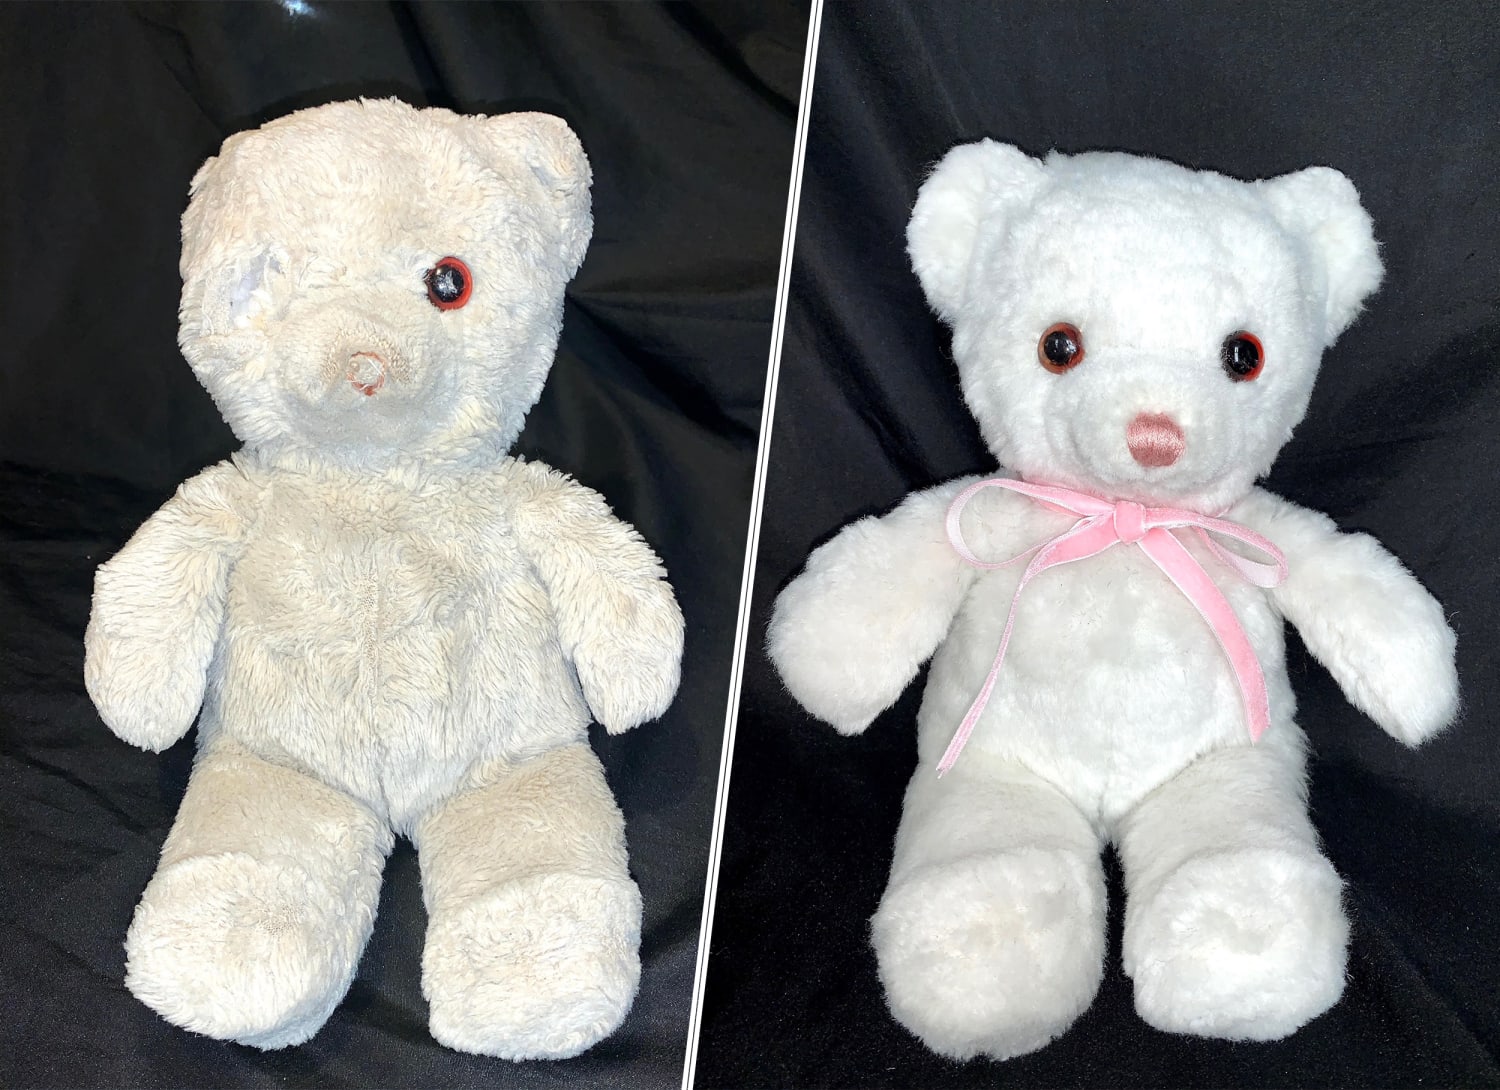 Woman gives new life to old stuffed animals in viral videos